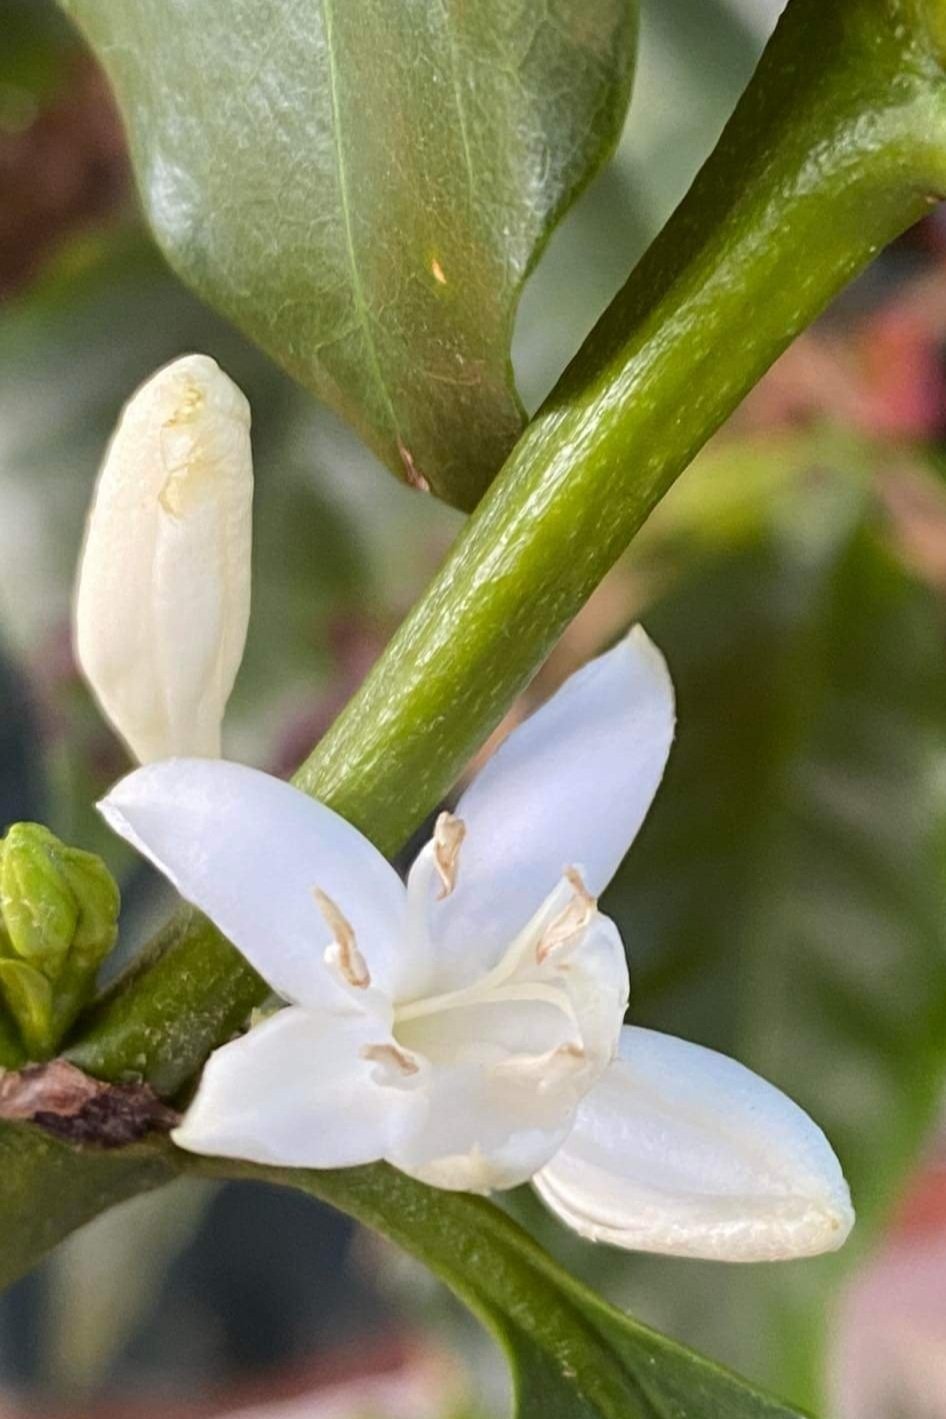  The aromatic flowers of the coffee plant are self pollinating so there will be a coffee fruit for each flower. 